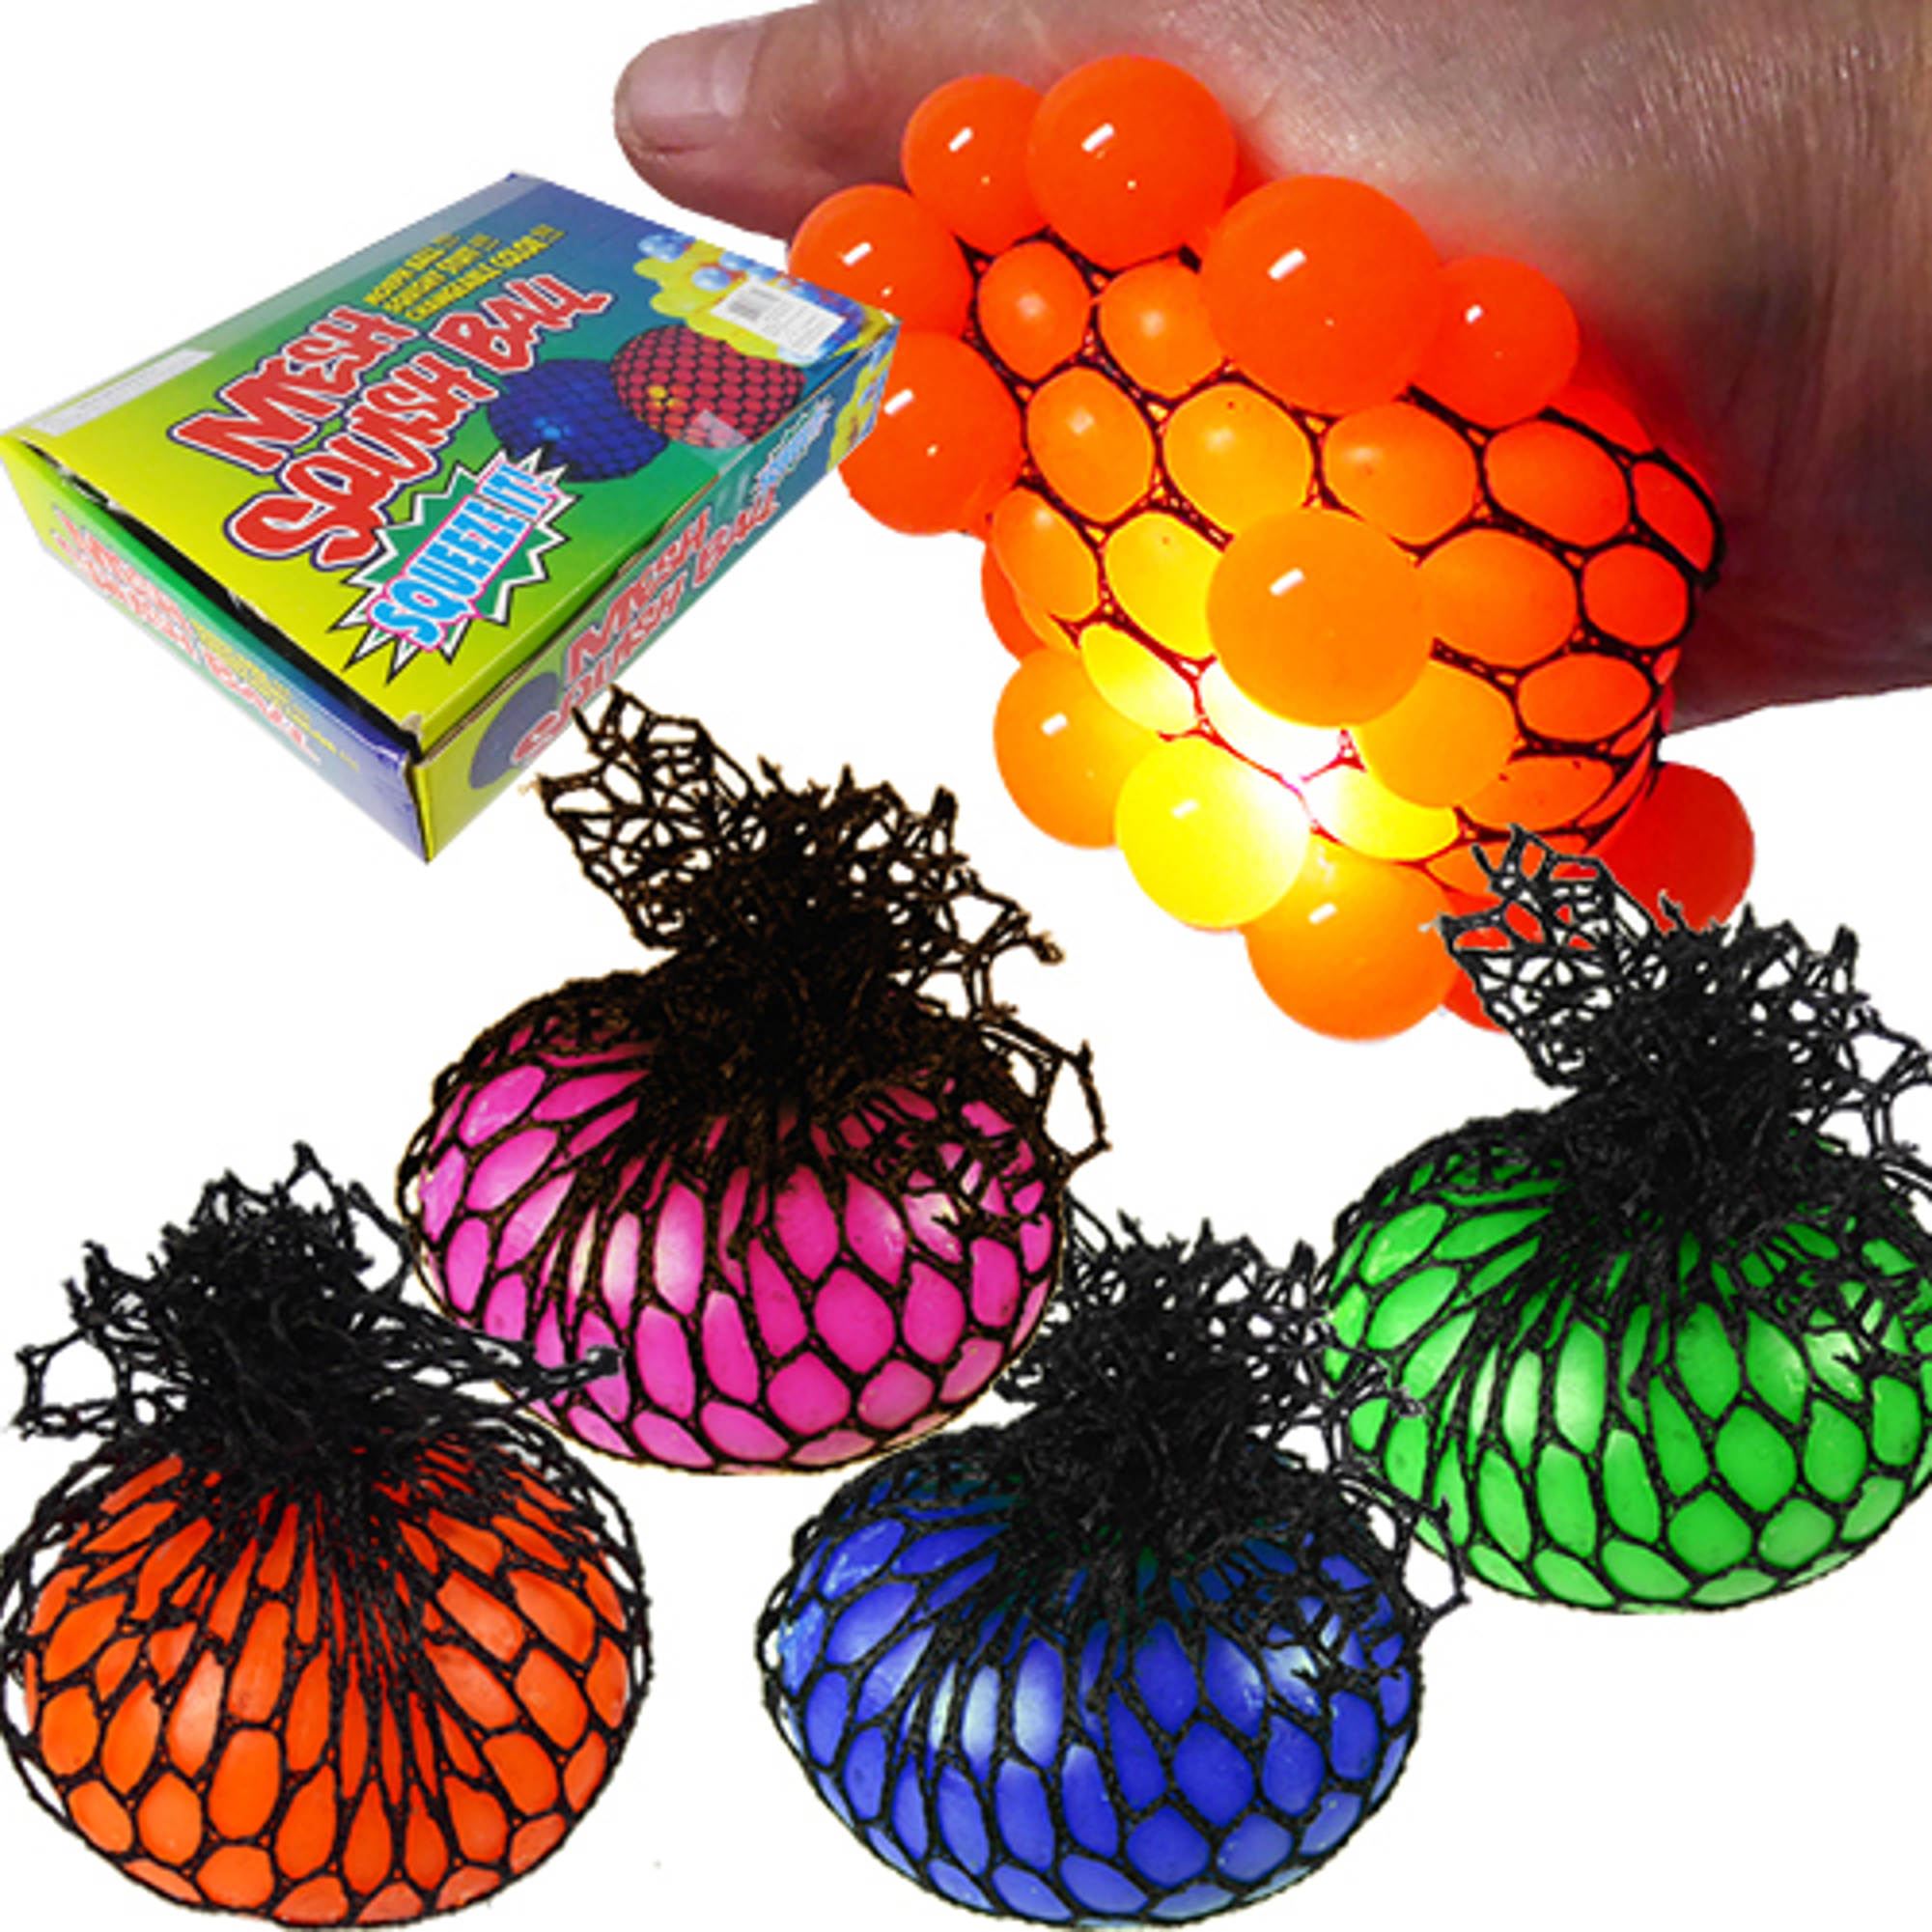 stretchy rubber ball in a net mesh such that squeezing it causes parts of it to pop out in bubbles slipping out through your fingers